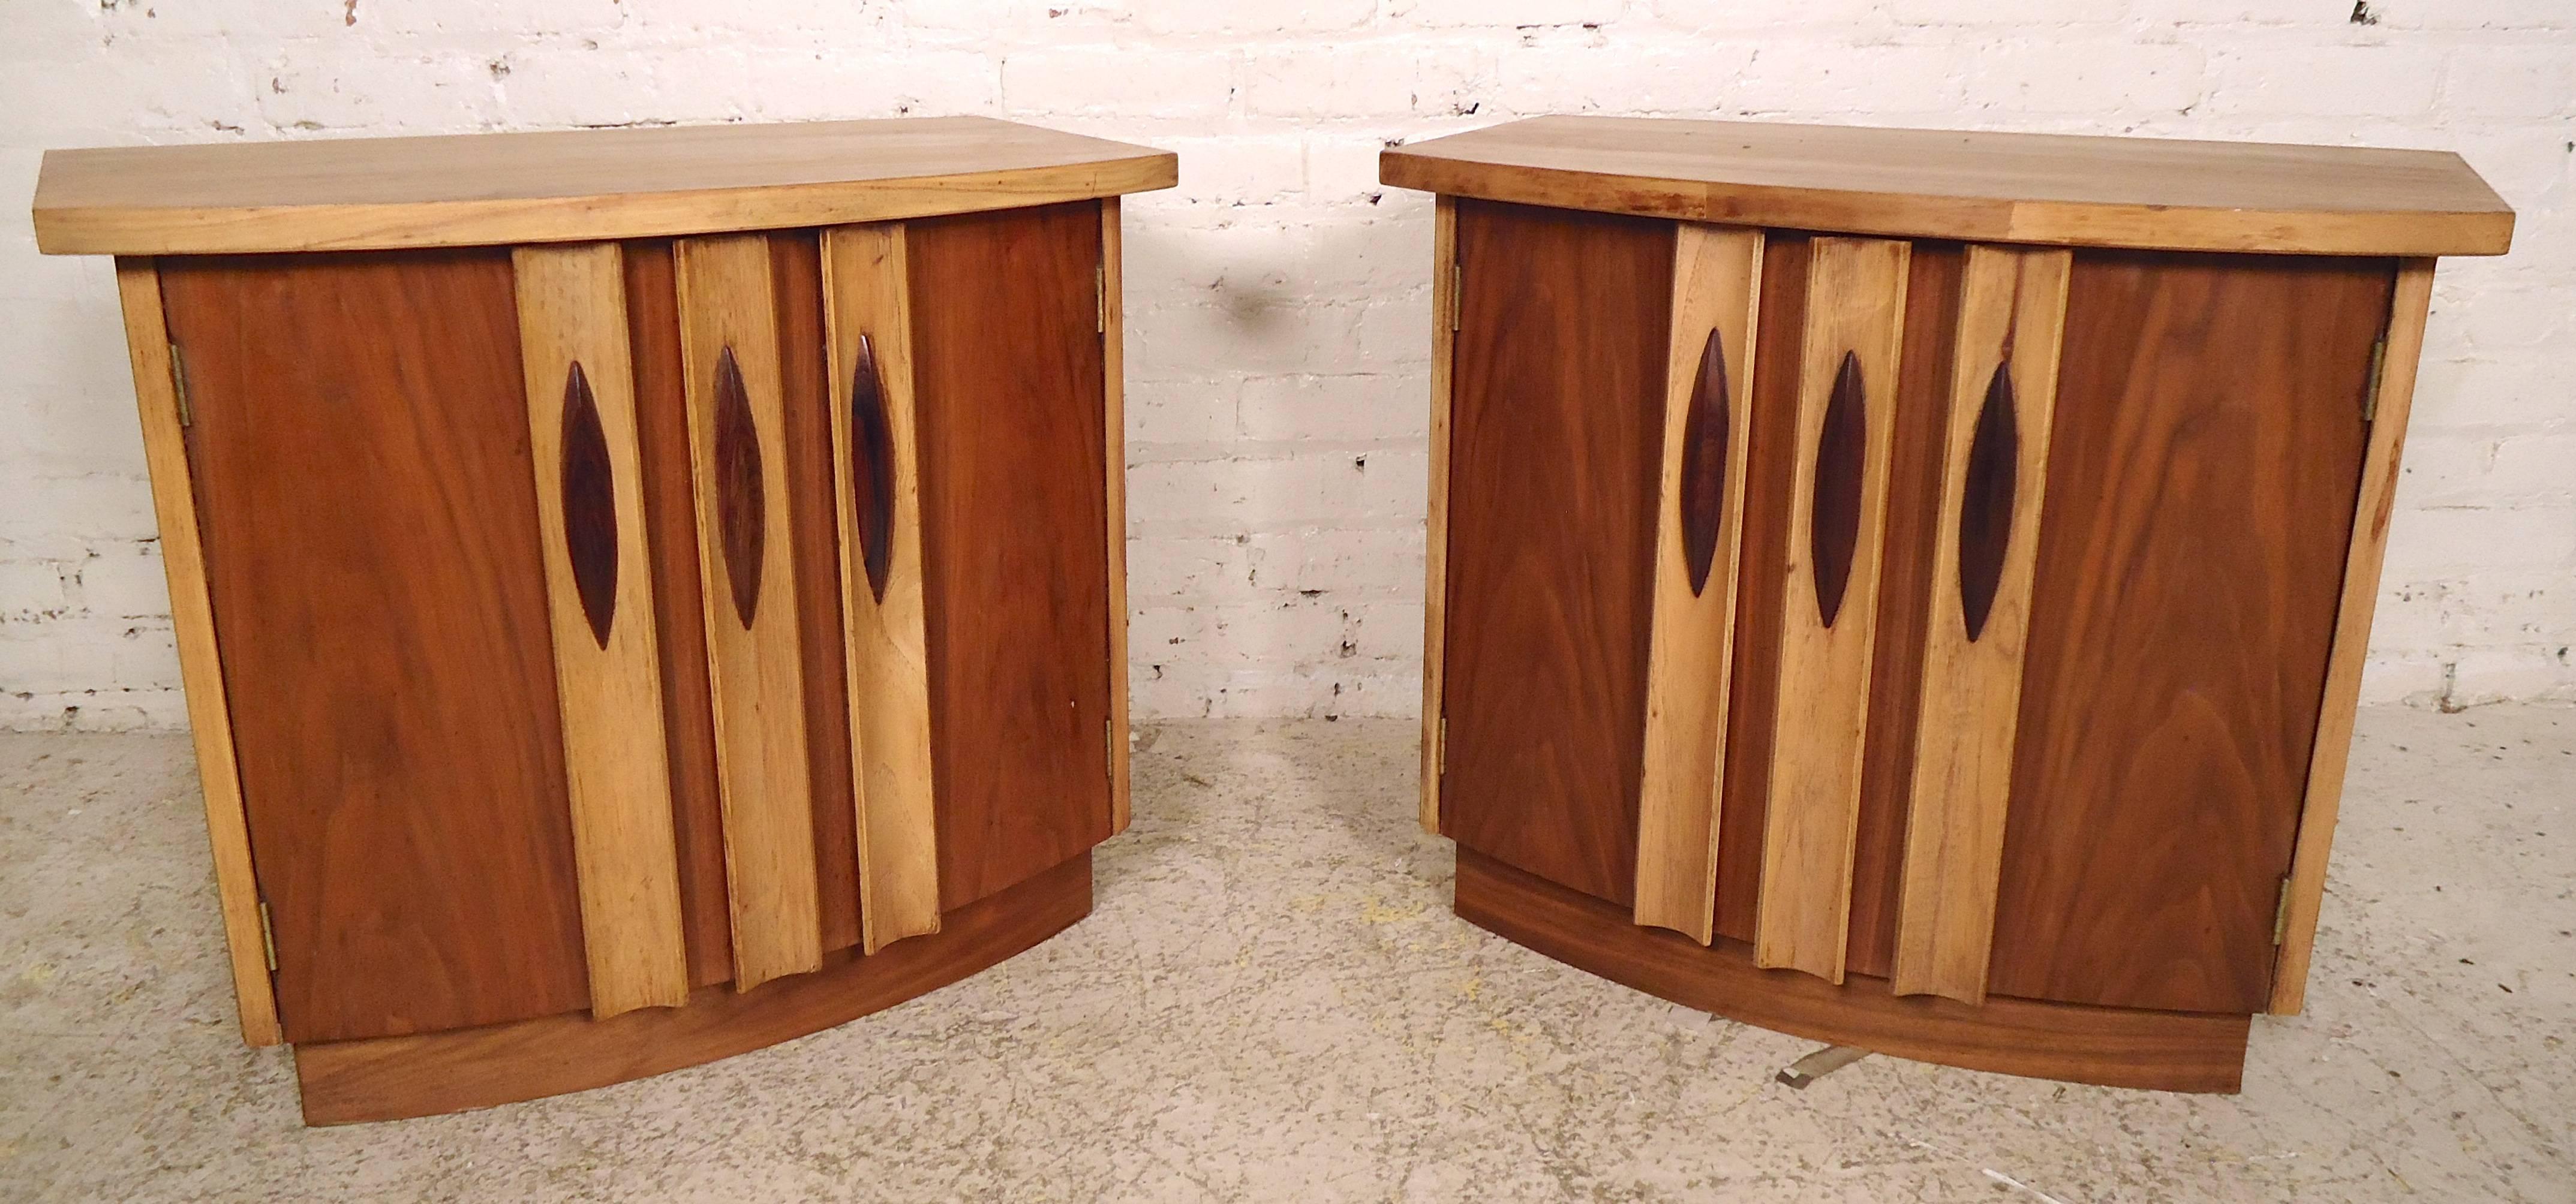 Mid-Century Modern nightstands with curved front, featuring accenting walnut and oak grain. Two-door cabinet space with shelf. Great for bedroom or living room.

(Please confirm item location - NY or NJ - with dealer).
      